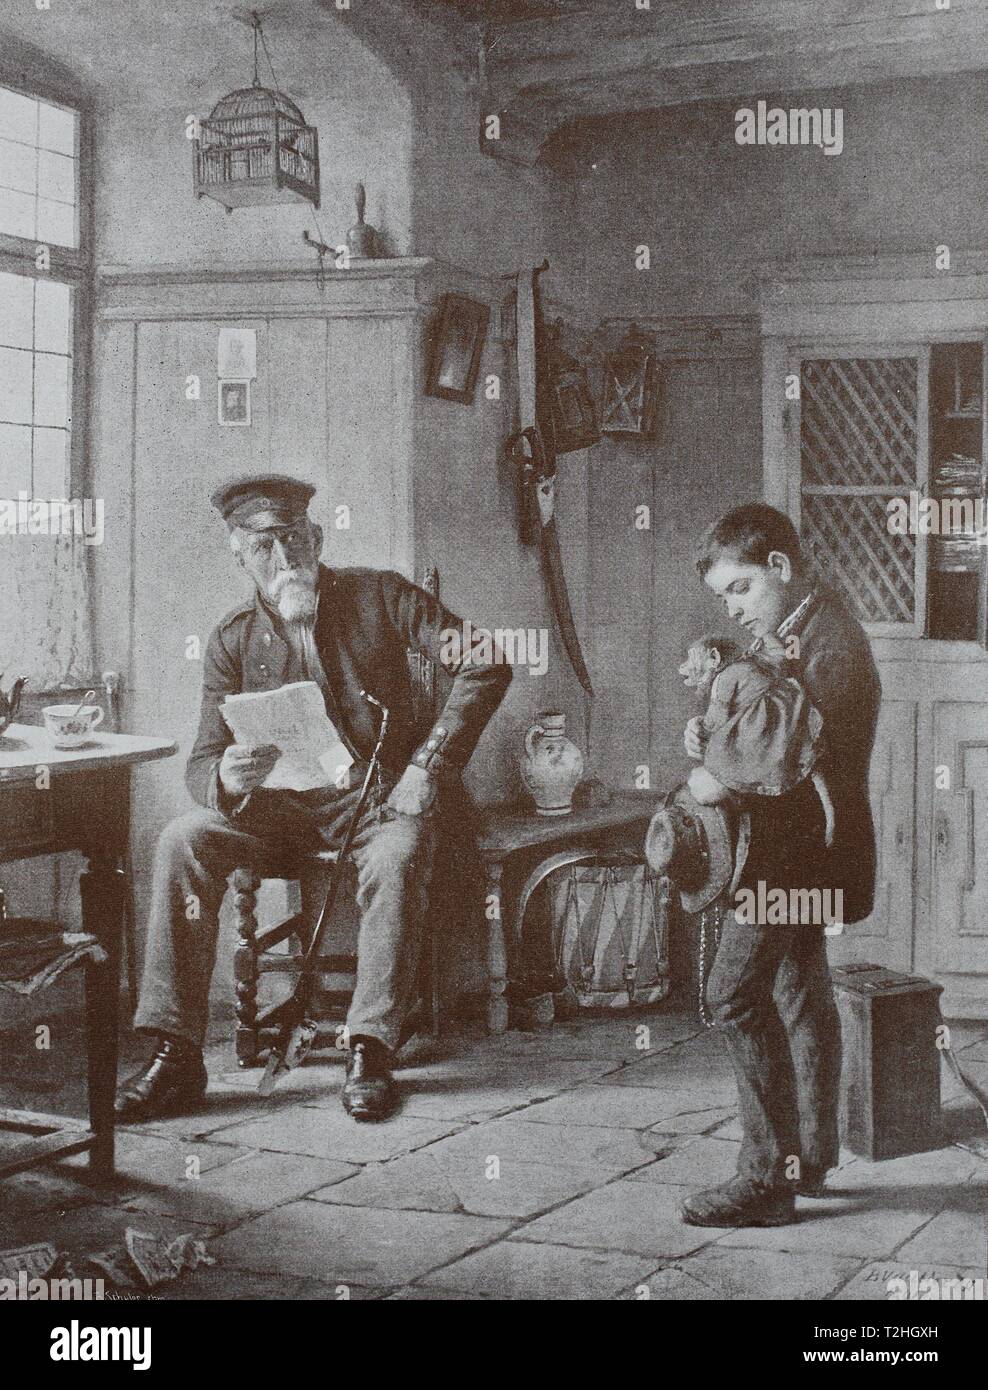 Disrespectful, boy has a monkey on his arm and presents it to his grandfather, 1899, historical illustration, Germany Stock Photo